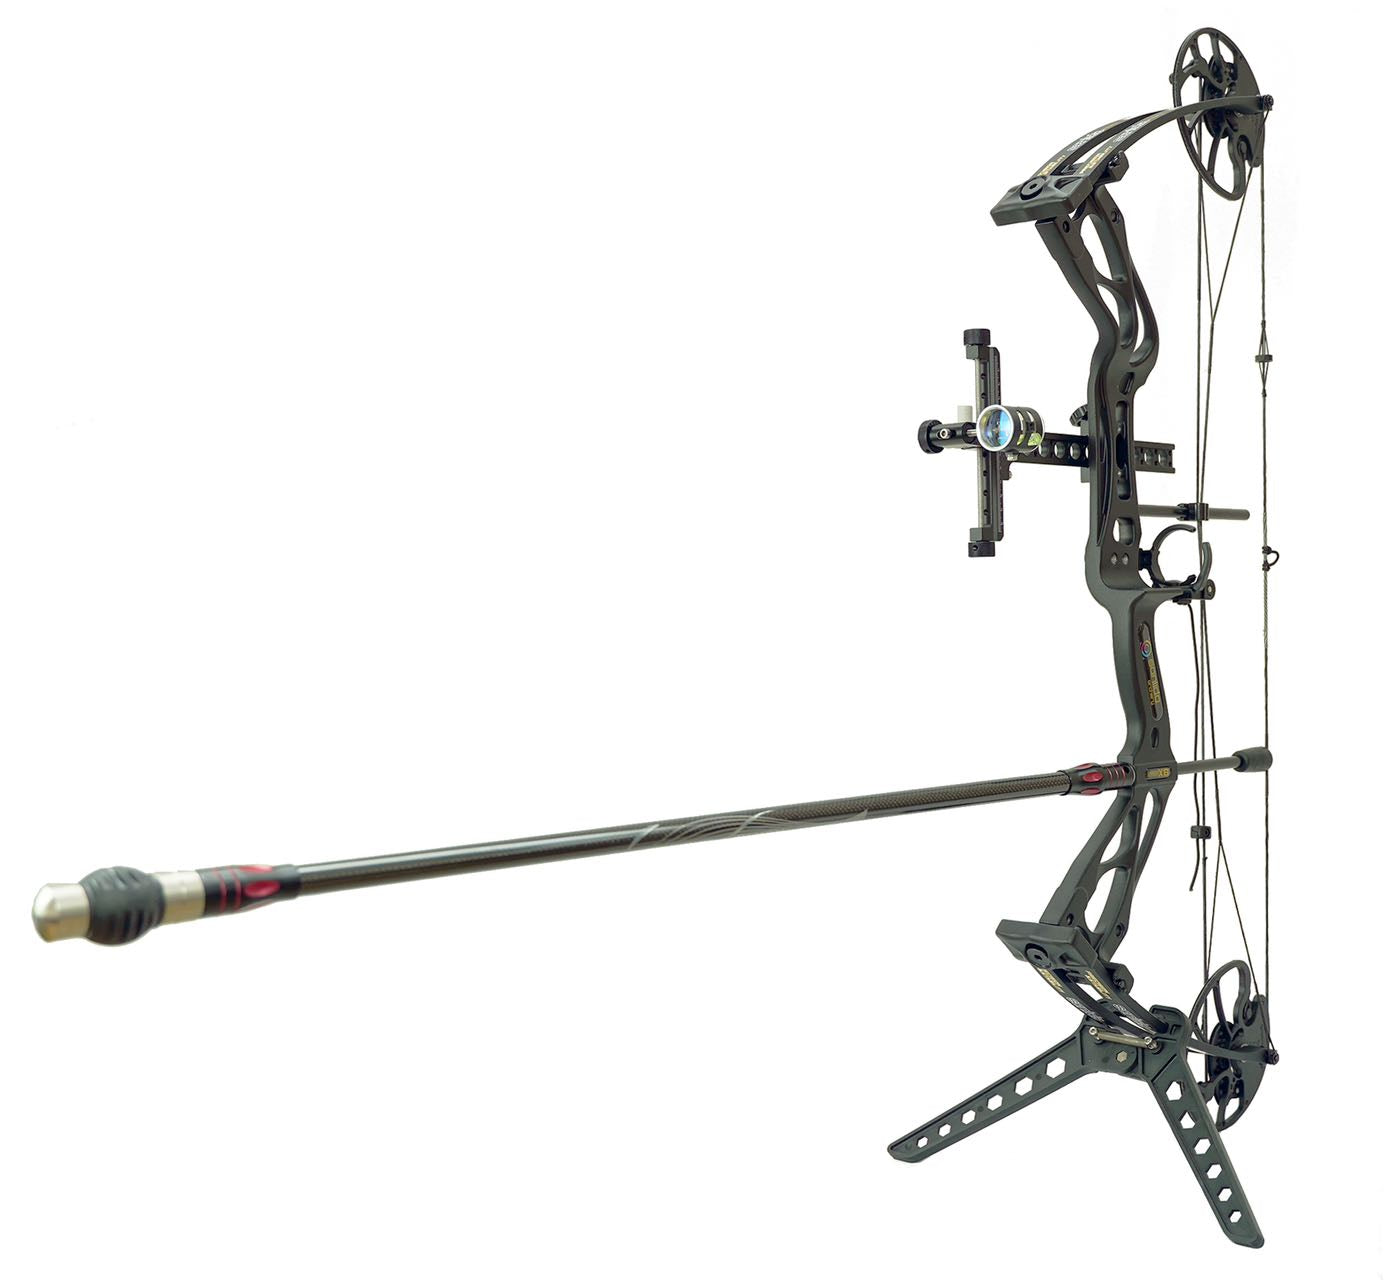 Sanlida X8 Target Compound Bow Package